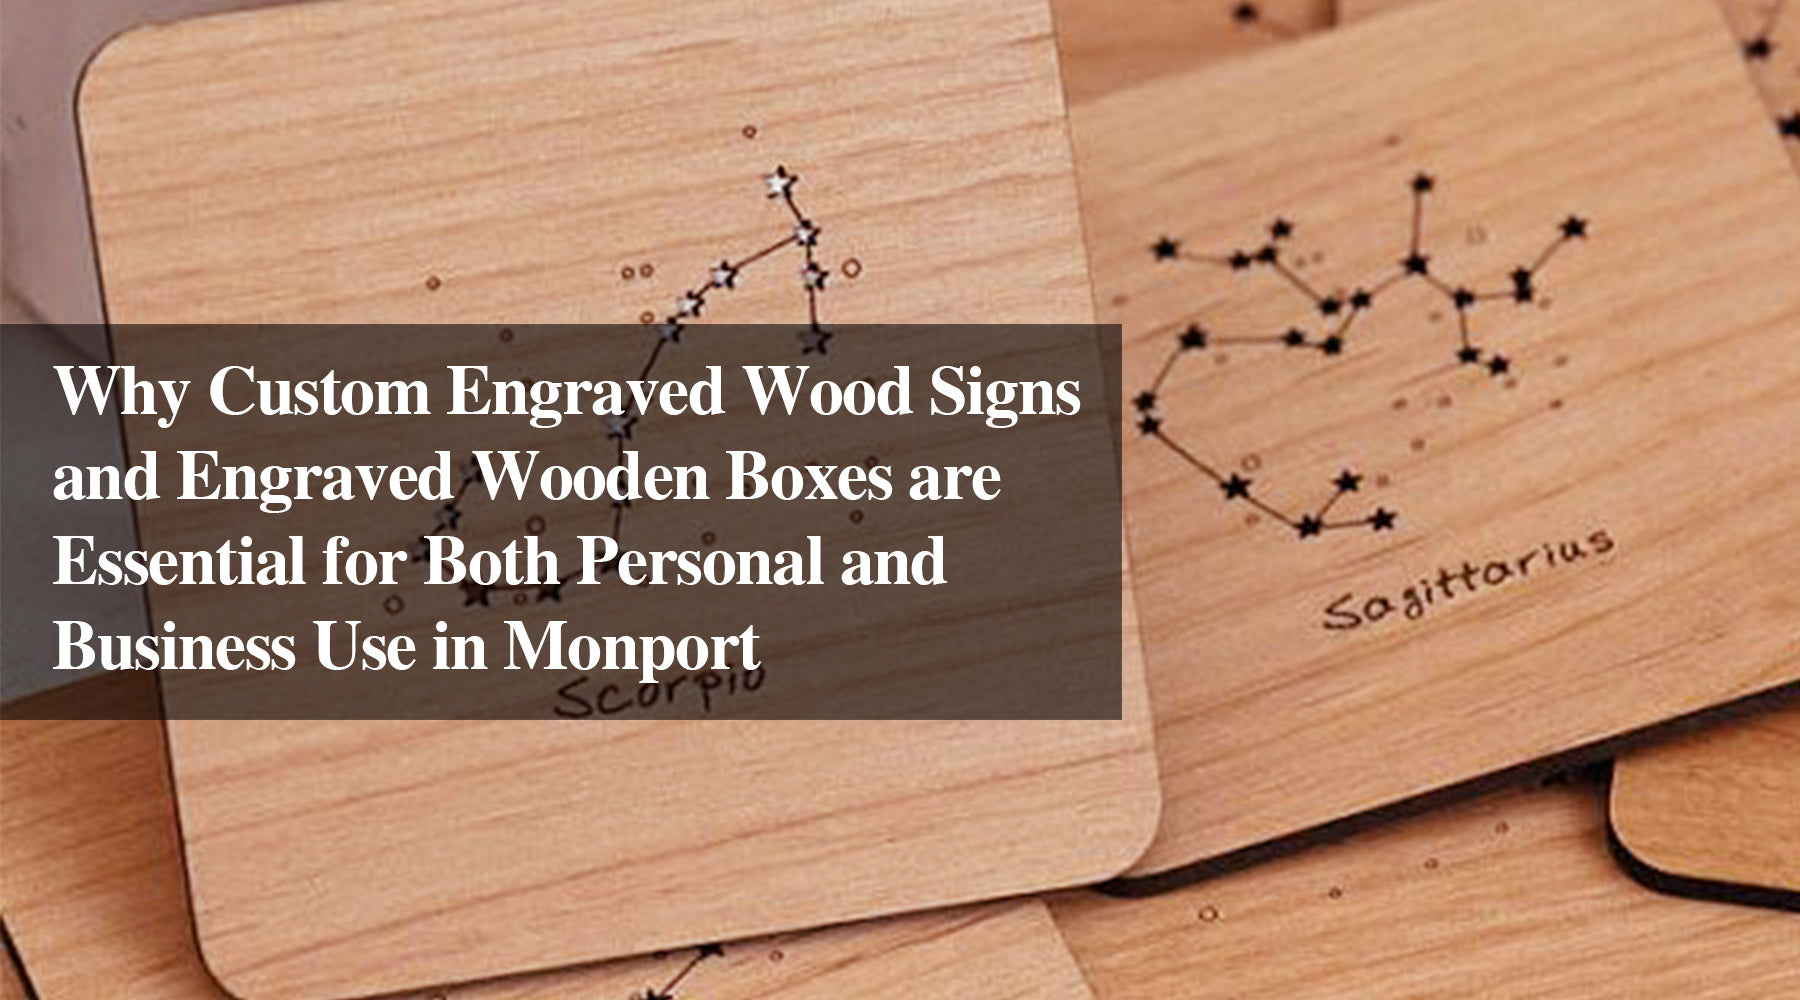 Why Custom Engraved Wood Signs and Engraved Wooden Boxes are Essential for Both Personal and Business Use in Monport